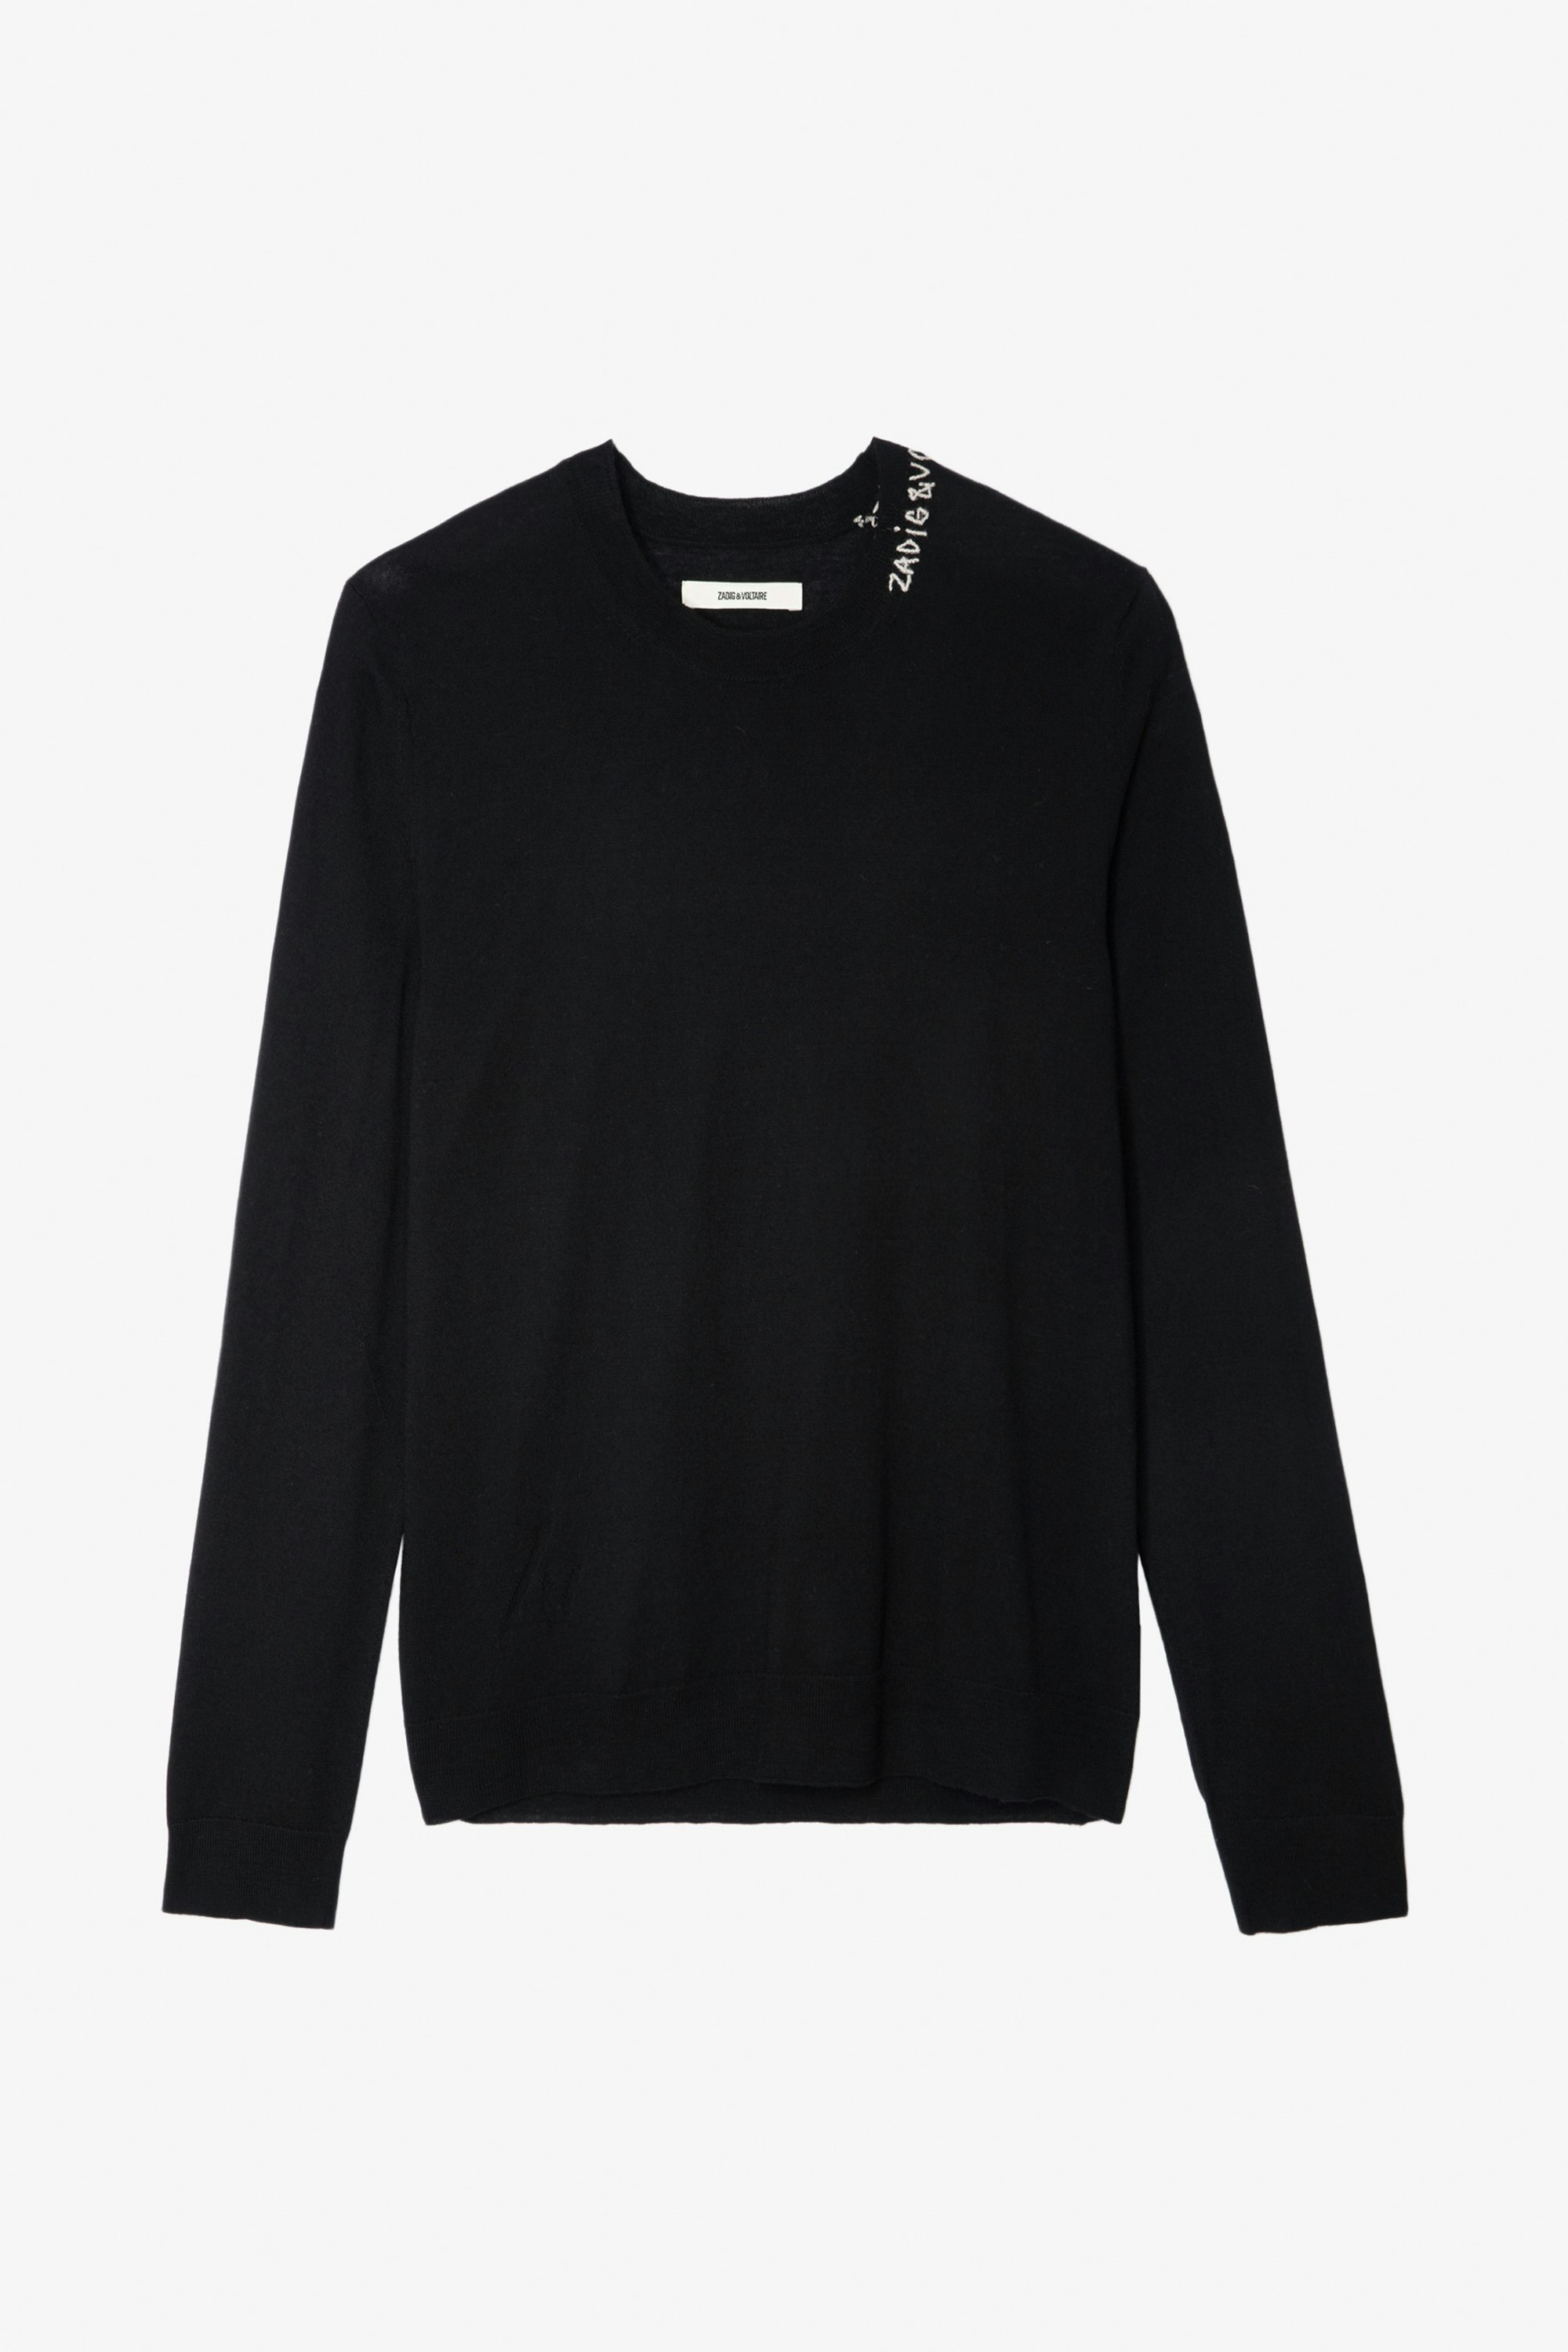 Kennedy Sweater  - Men’s black merino wool sweater with Zadig&Voltaire embroidery on the neckline.